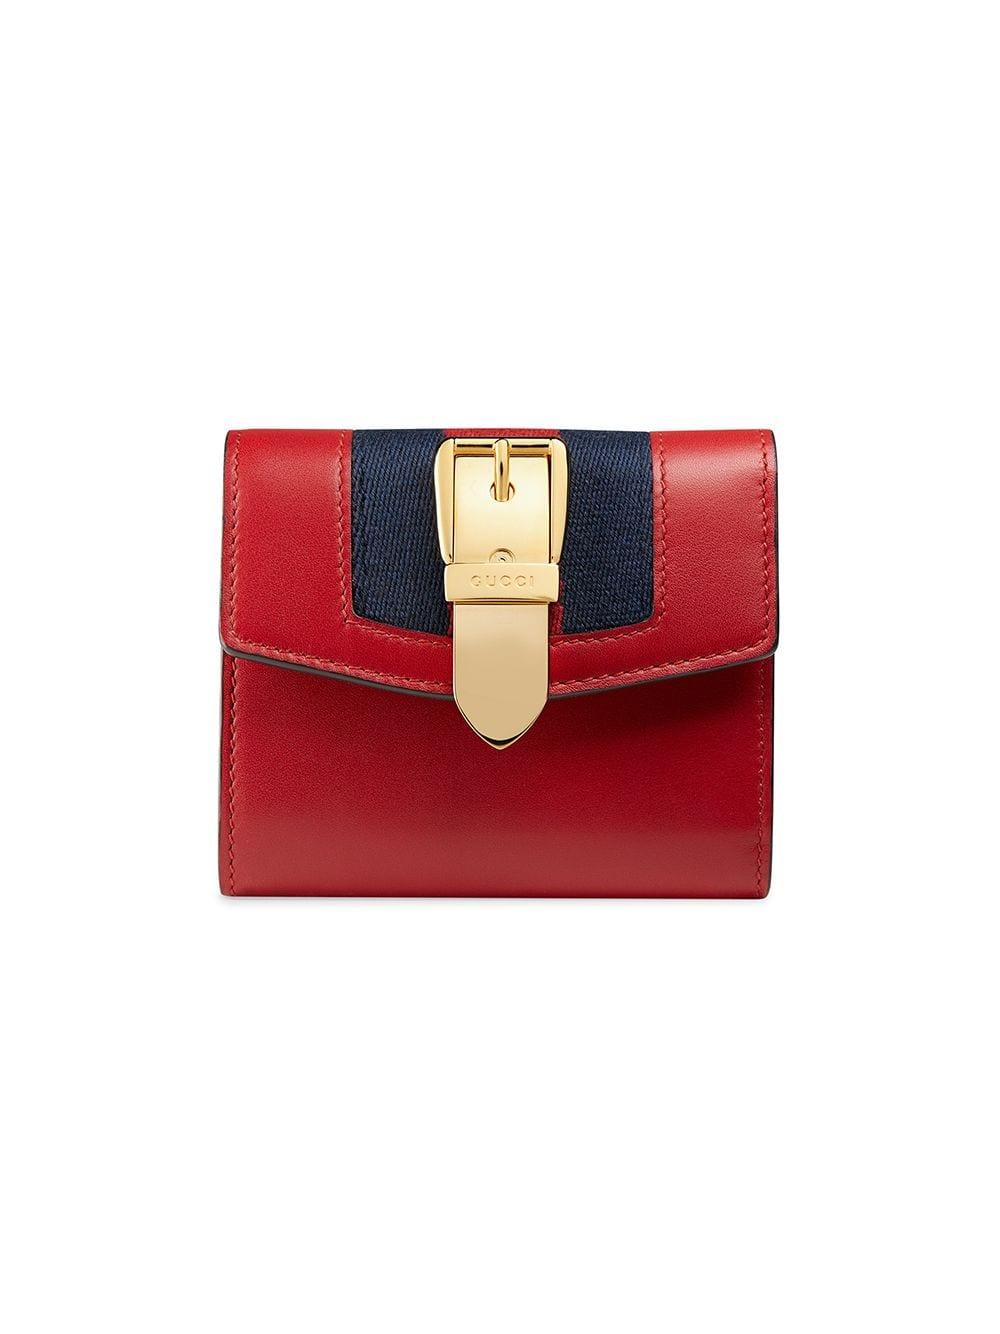 Gucci Sylvie Leather Wallet in Red - Lyst